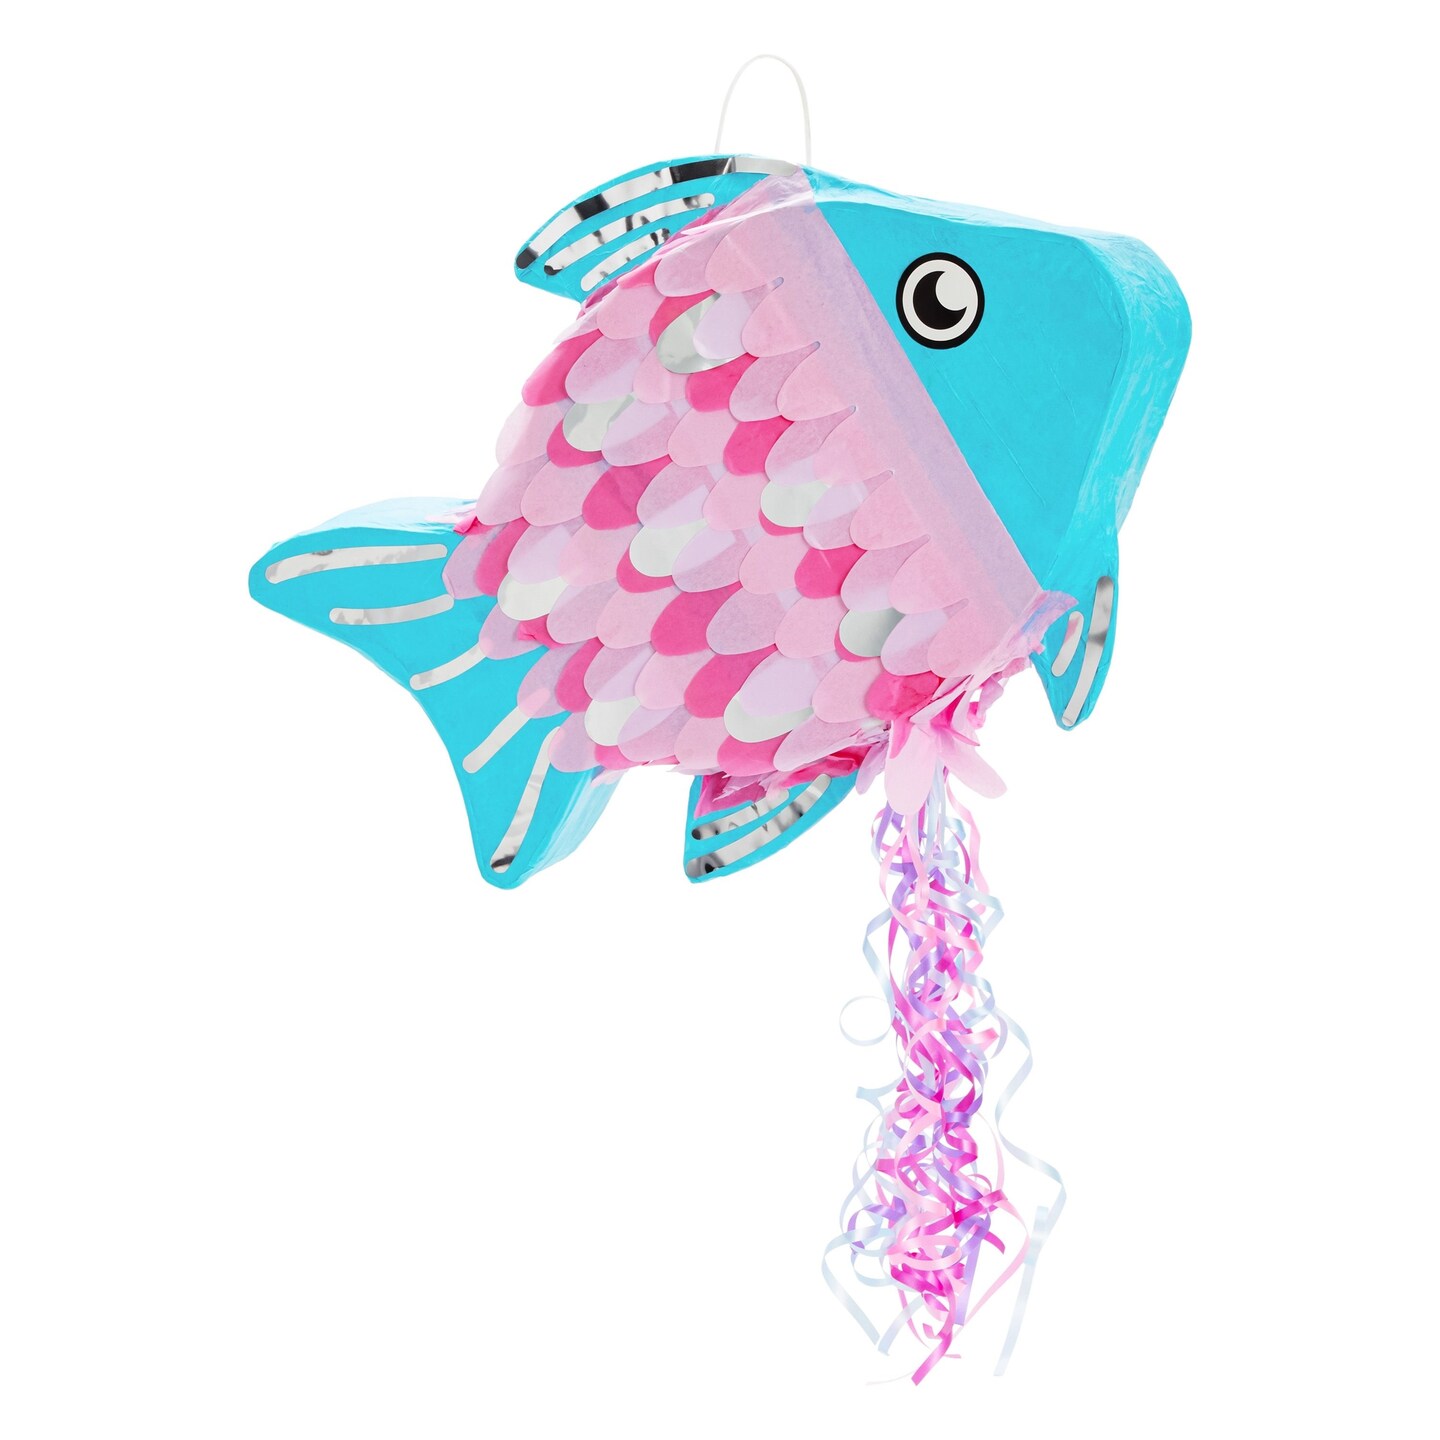 Small Pink Foil Design Blue Fish Pinata with Pull Strings for Ocean Theme Birthday Under The Sea Party Decorations, Baby Shower, Mermaid Party Theme (17 x 13 x 3 Inches)